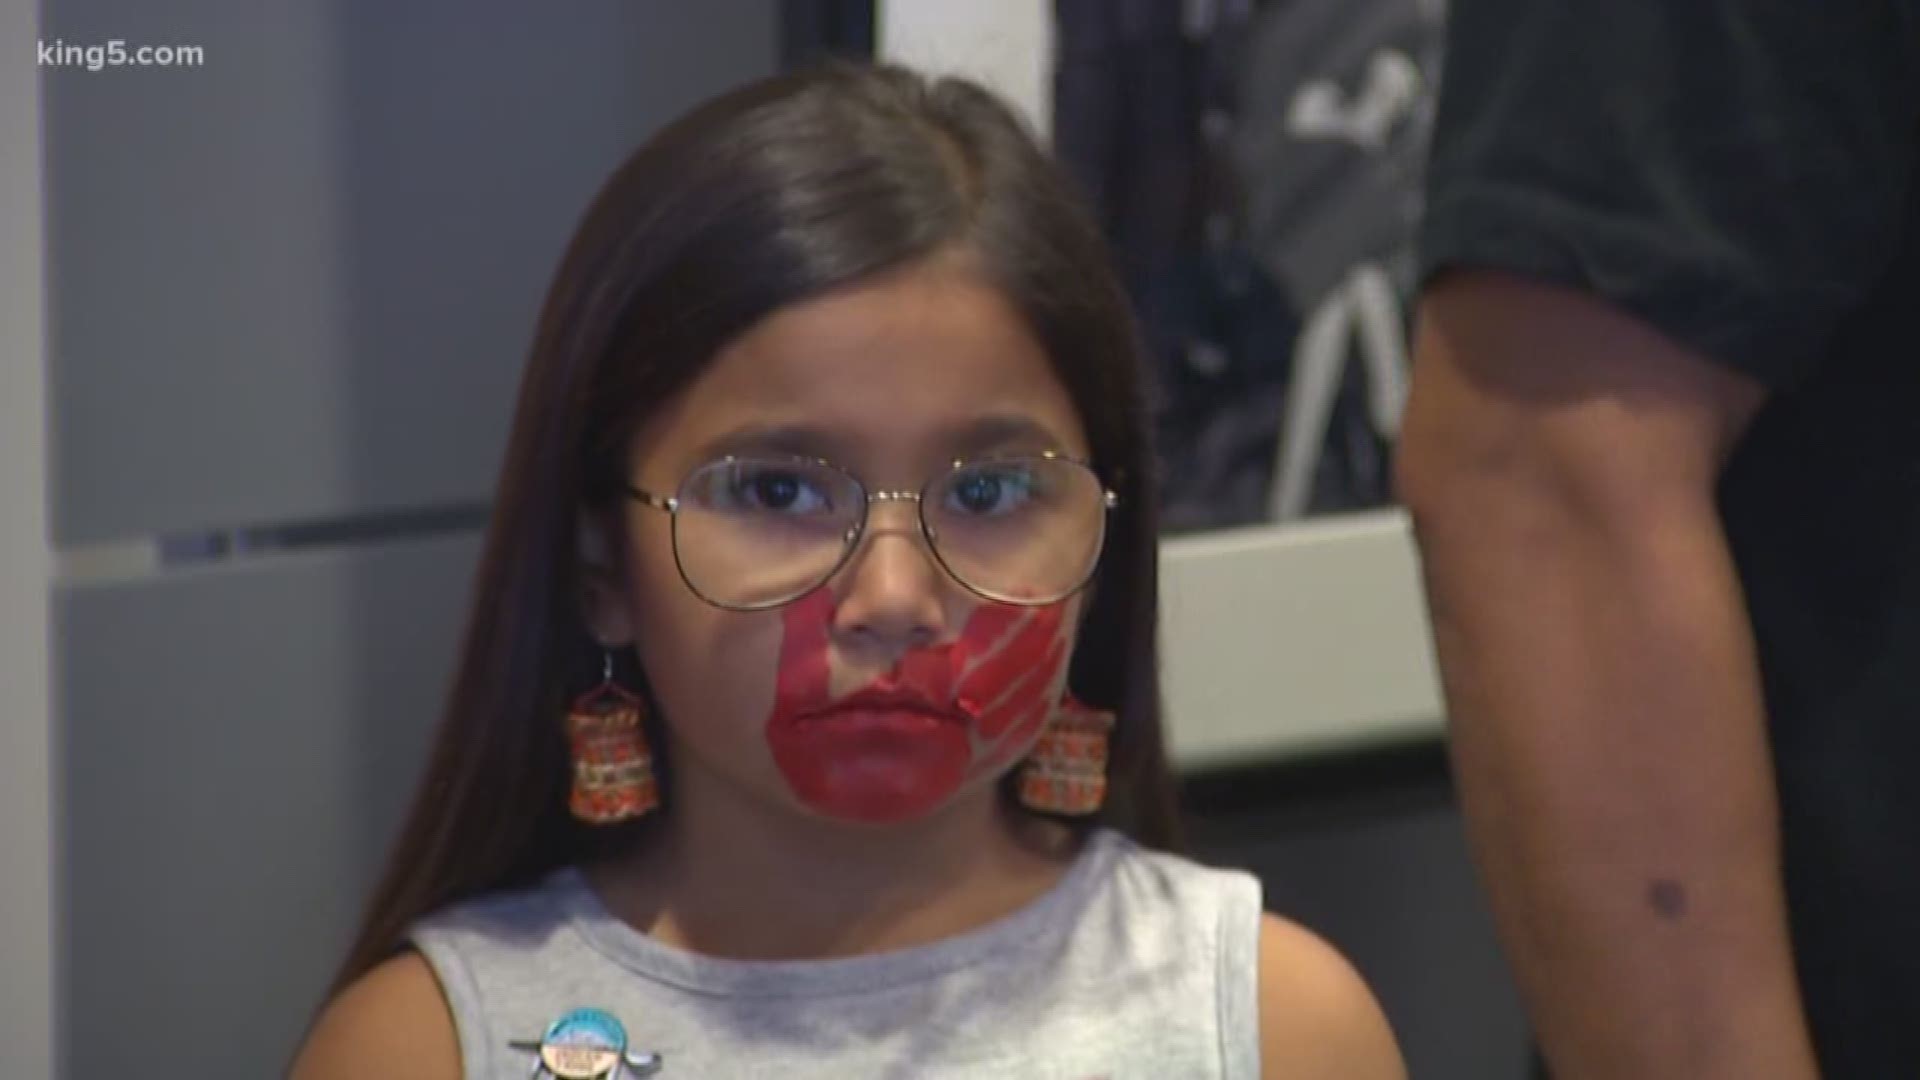 The Seattle City Council unanimously approved a resolution to reduce the number of missing and murdered indigenous women and girls. KING 5's Chris Daniels reports.